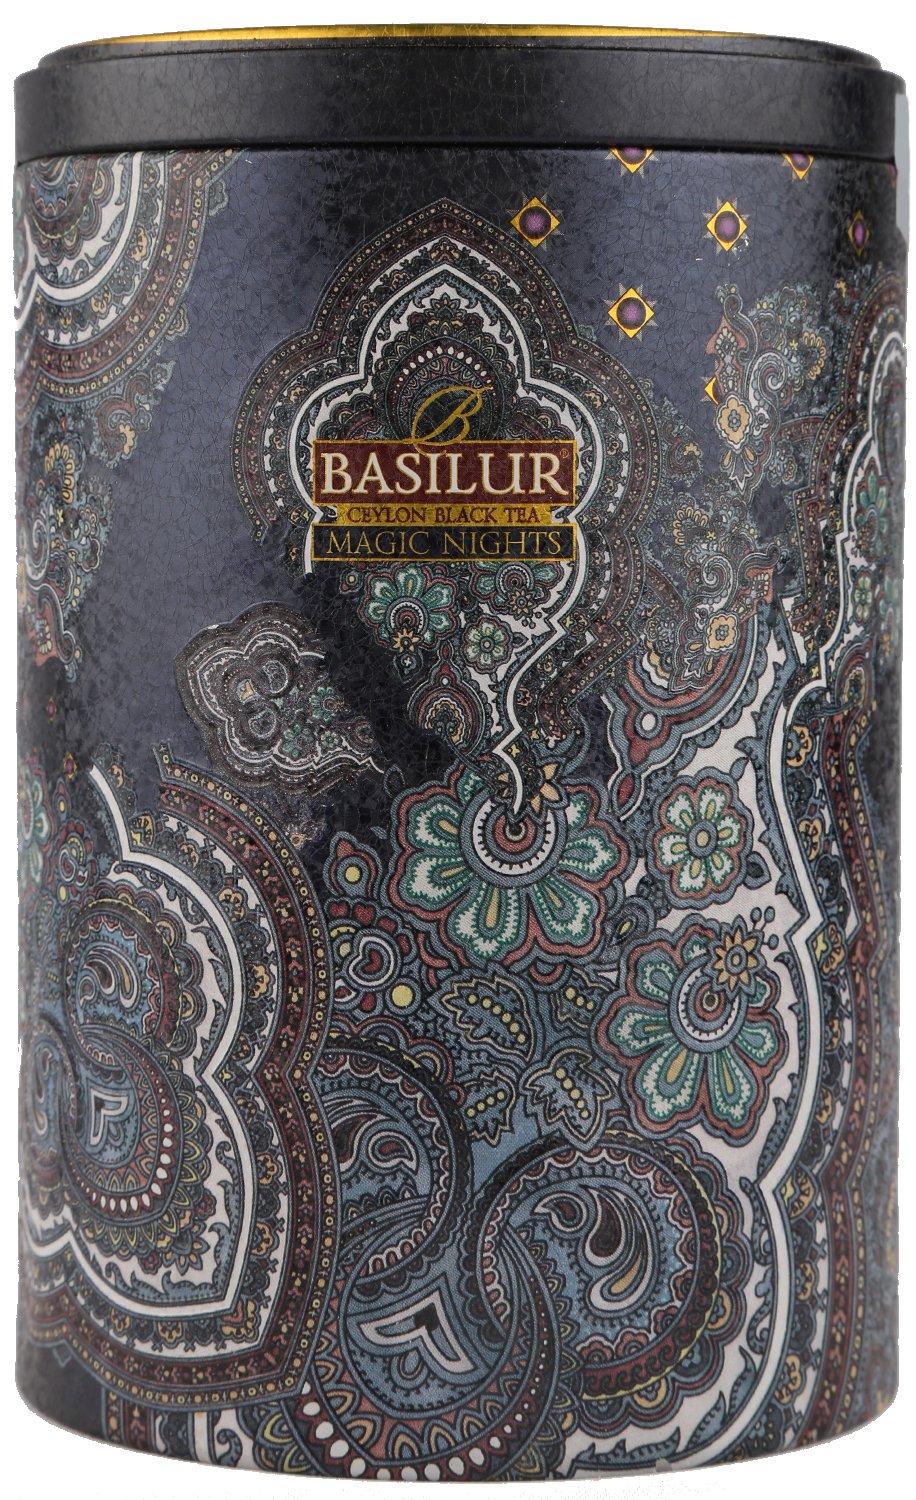 Basilur Pure Ceylon Black Tea "1001 Nights" Oriental Collection with cornflower, blue malva,cranberry fruits and flavour in the Metal Caddy